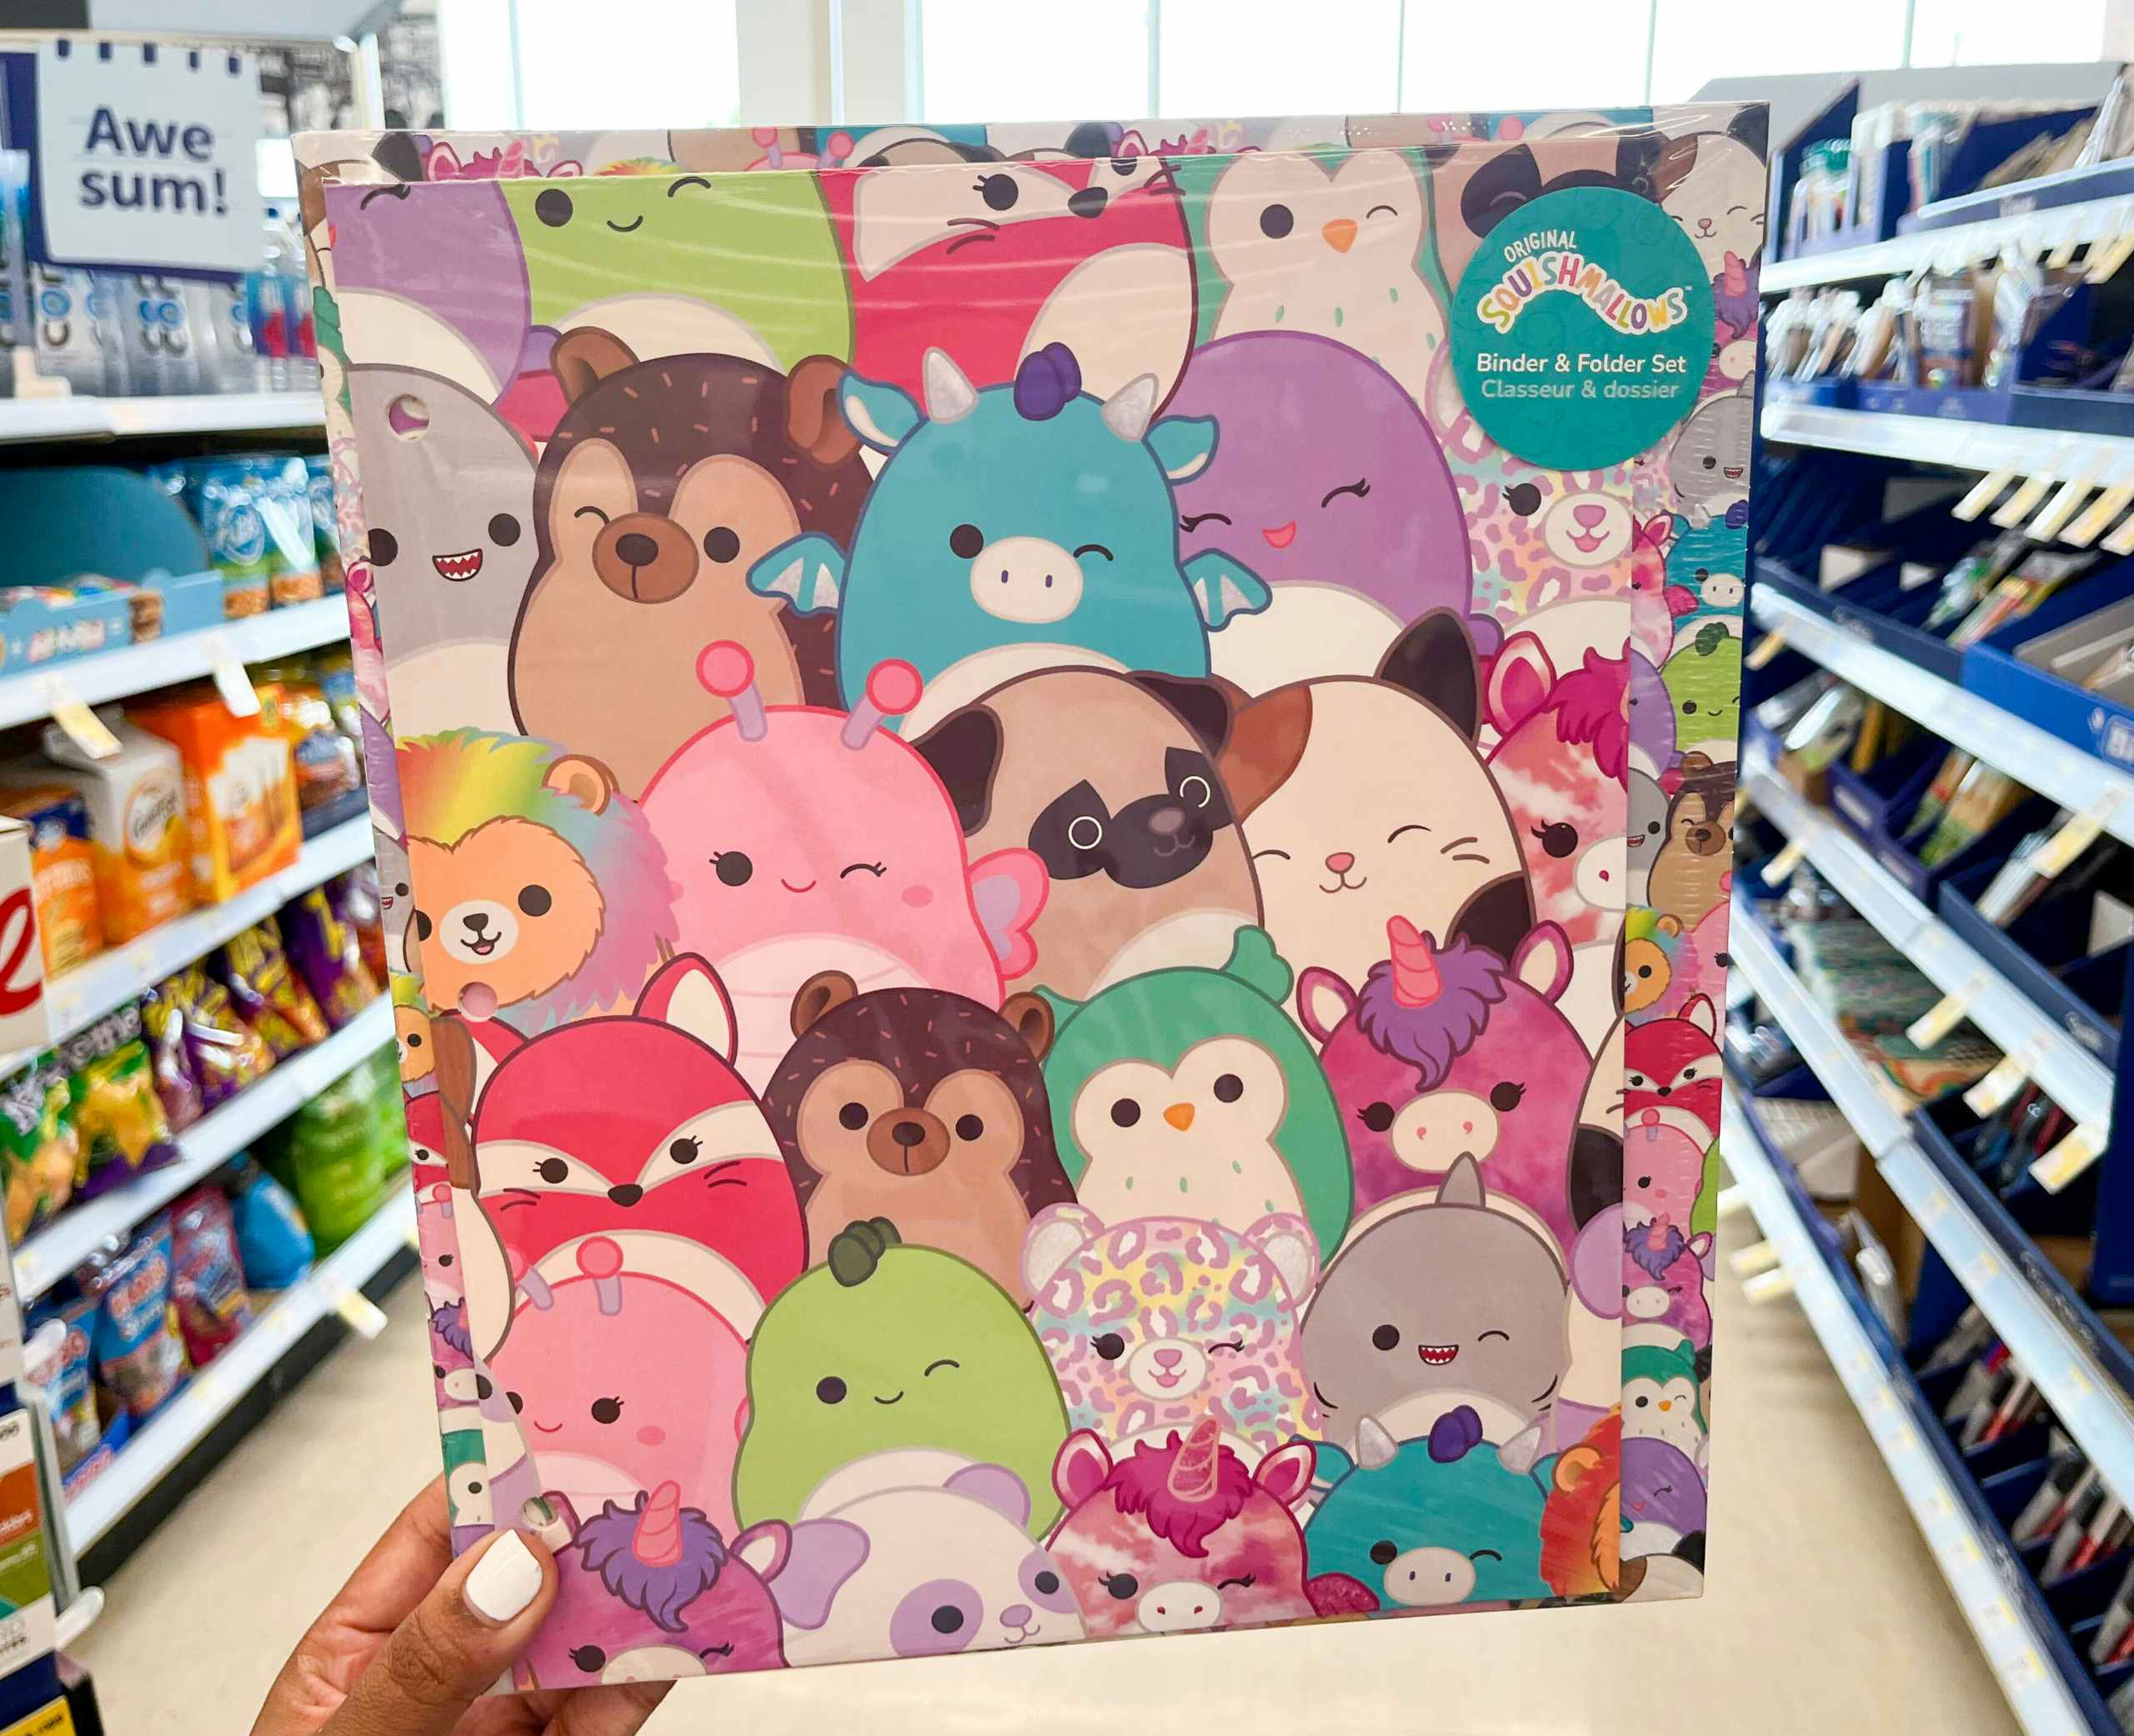 hand holding Squishmallow binder and folder set in aisle